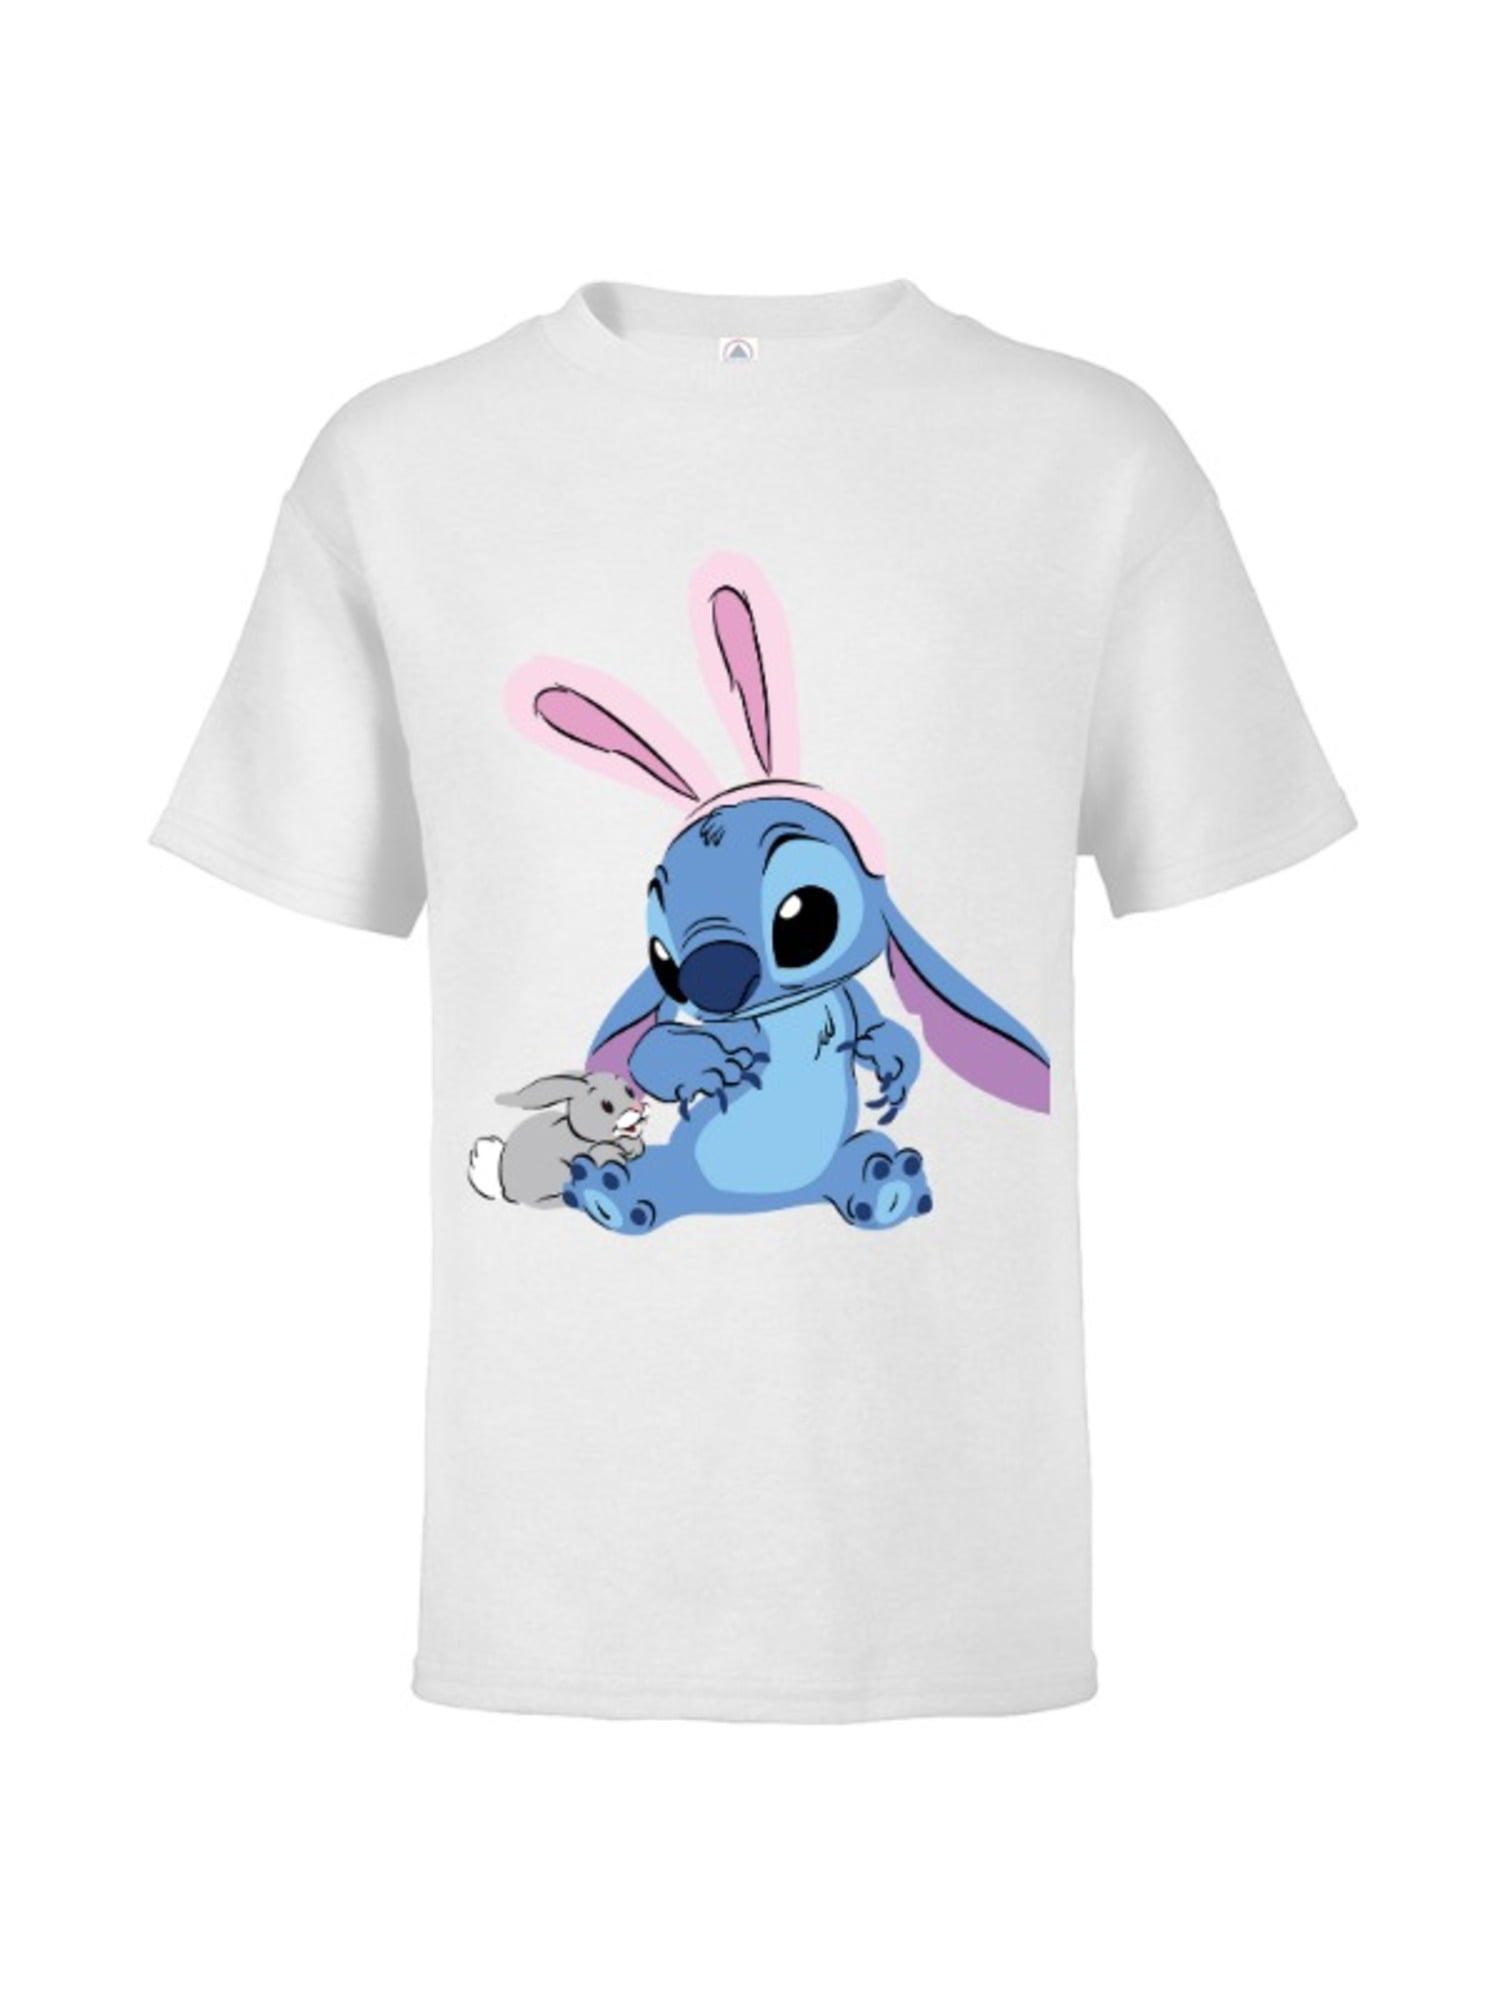 Cute Easter Bunny Shirt Women Plus Size Clothing Baby Spring T-Shirt for Boys Kids Toddler Infant Youth Girls